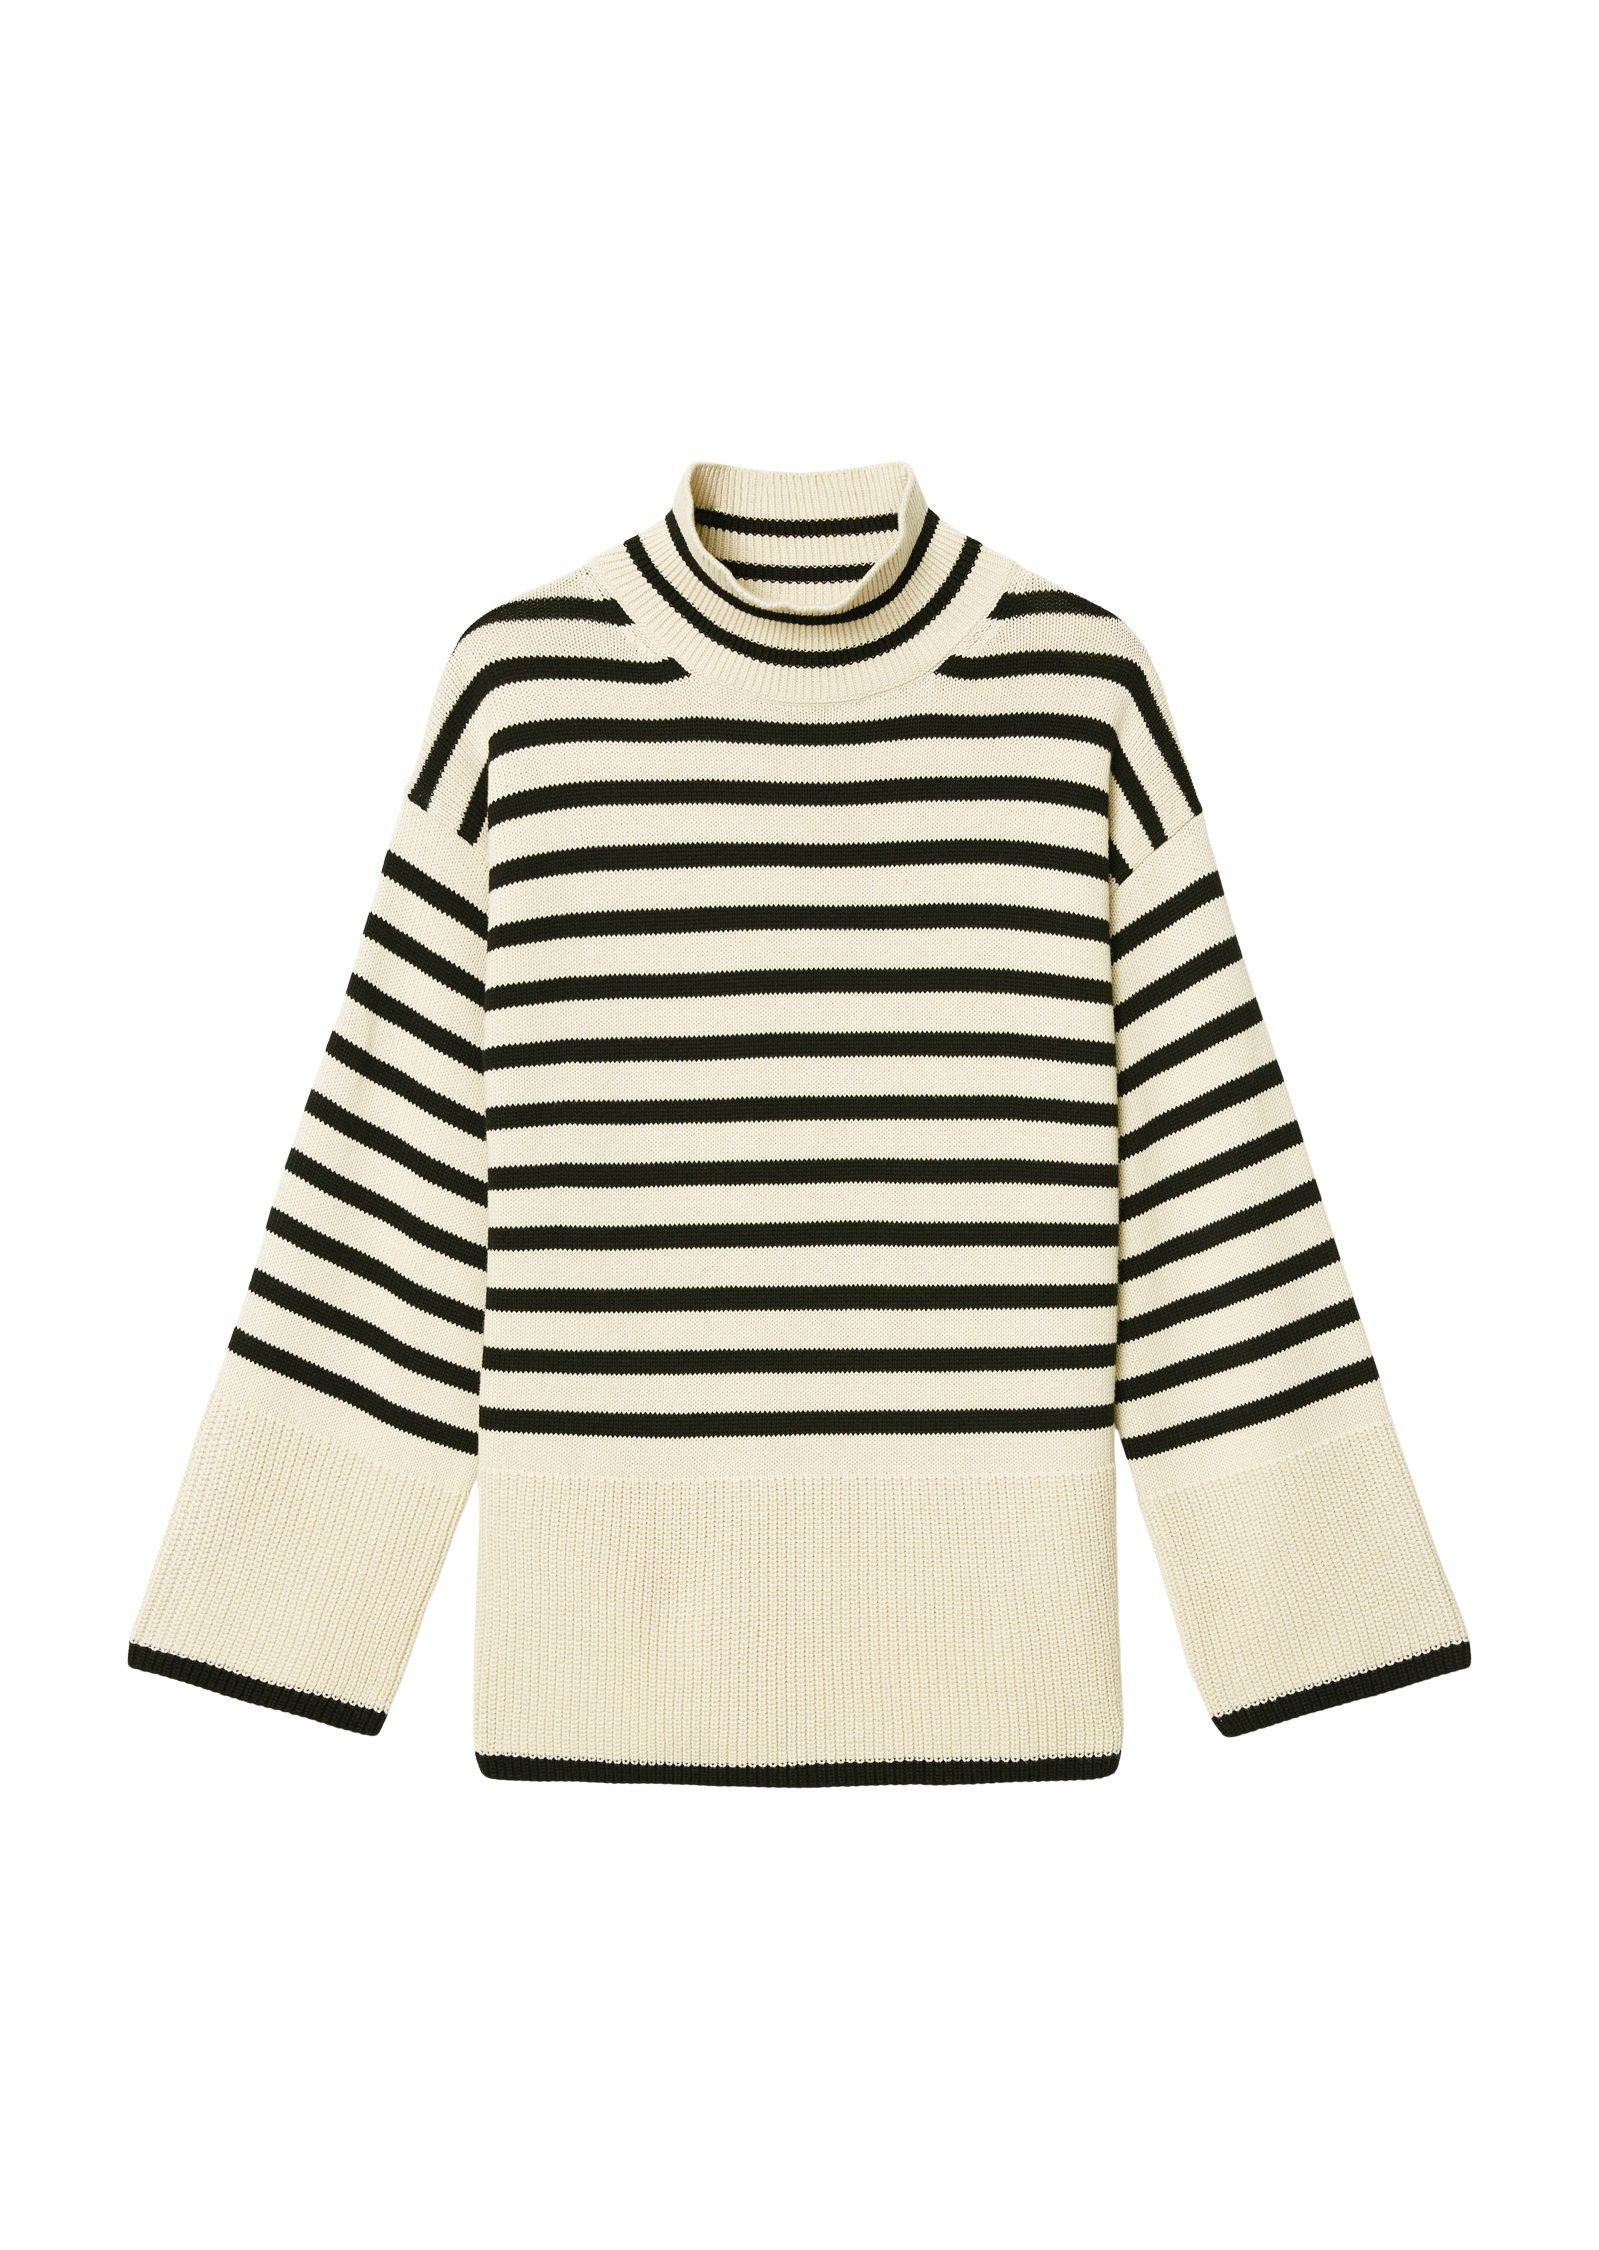 Marc O'Polo Strickpullover oversized sand multi/chalky